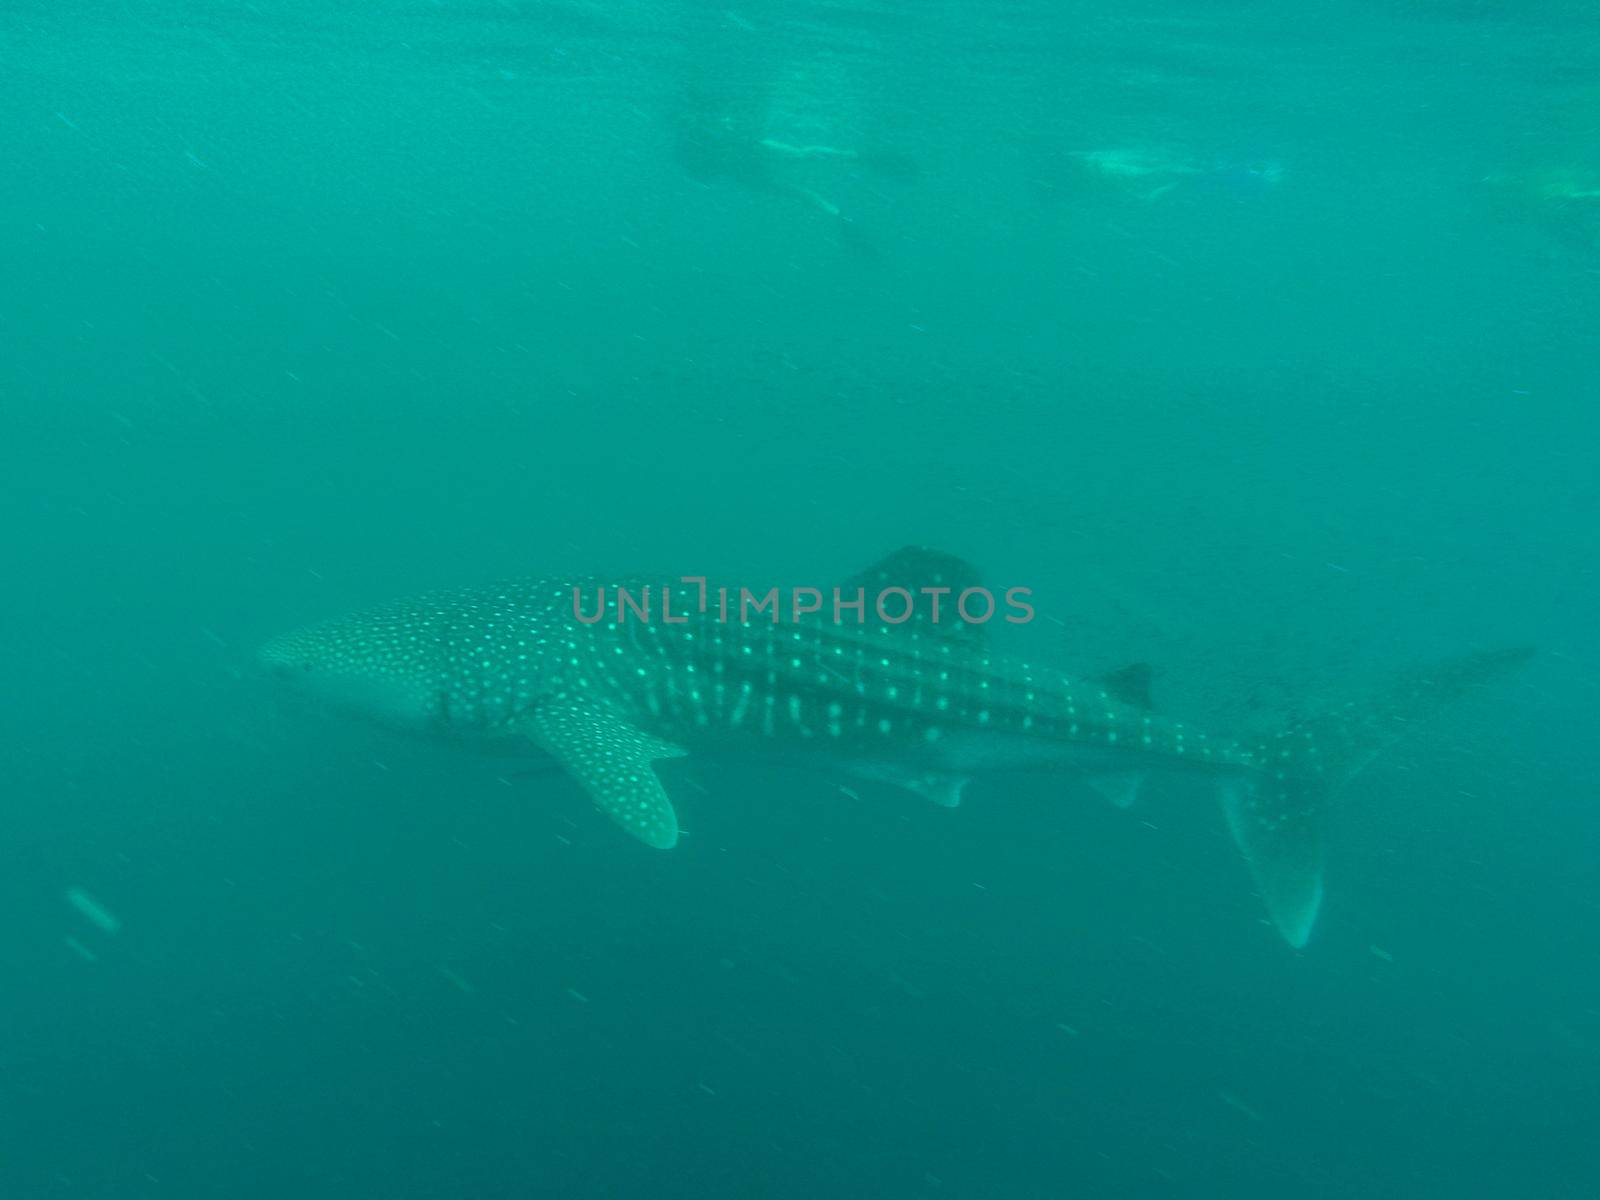 Whale Shark in ocean with Cobia fish and Remoras, Western Australia